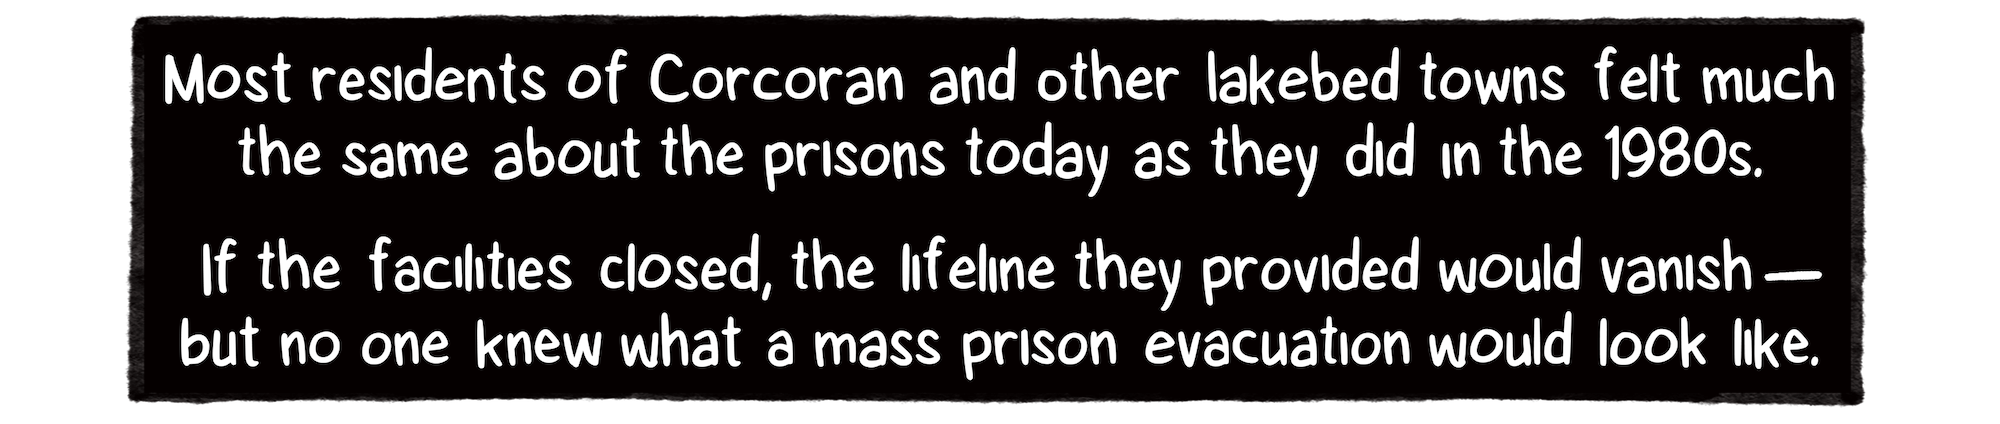 A black box with words in white letters: Most residents of Corcoran and other lakebed towns felt much the same about the prisons today as they did in the 1980s. If the facilities closed, the lifeline they provided would vanish – but no one knew what a mass prison evacuation would look like.